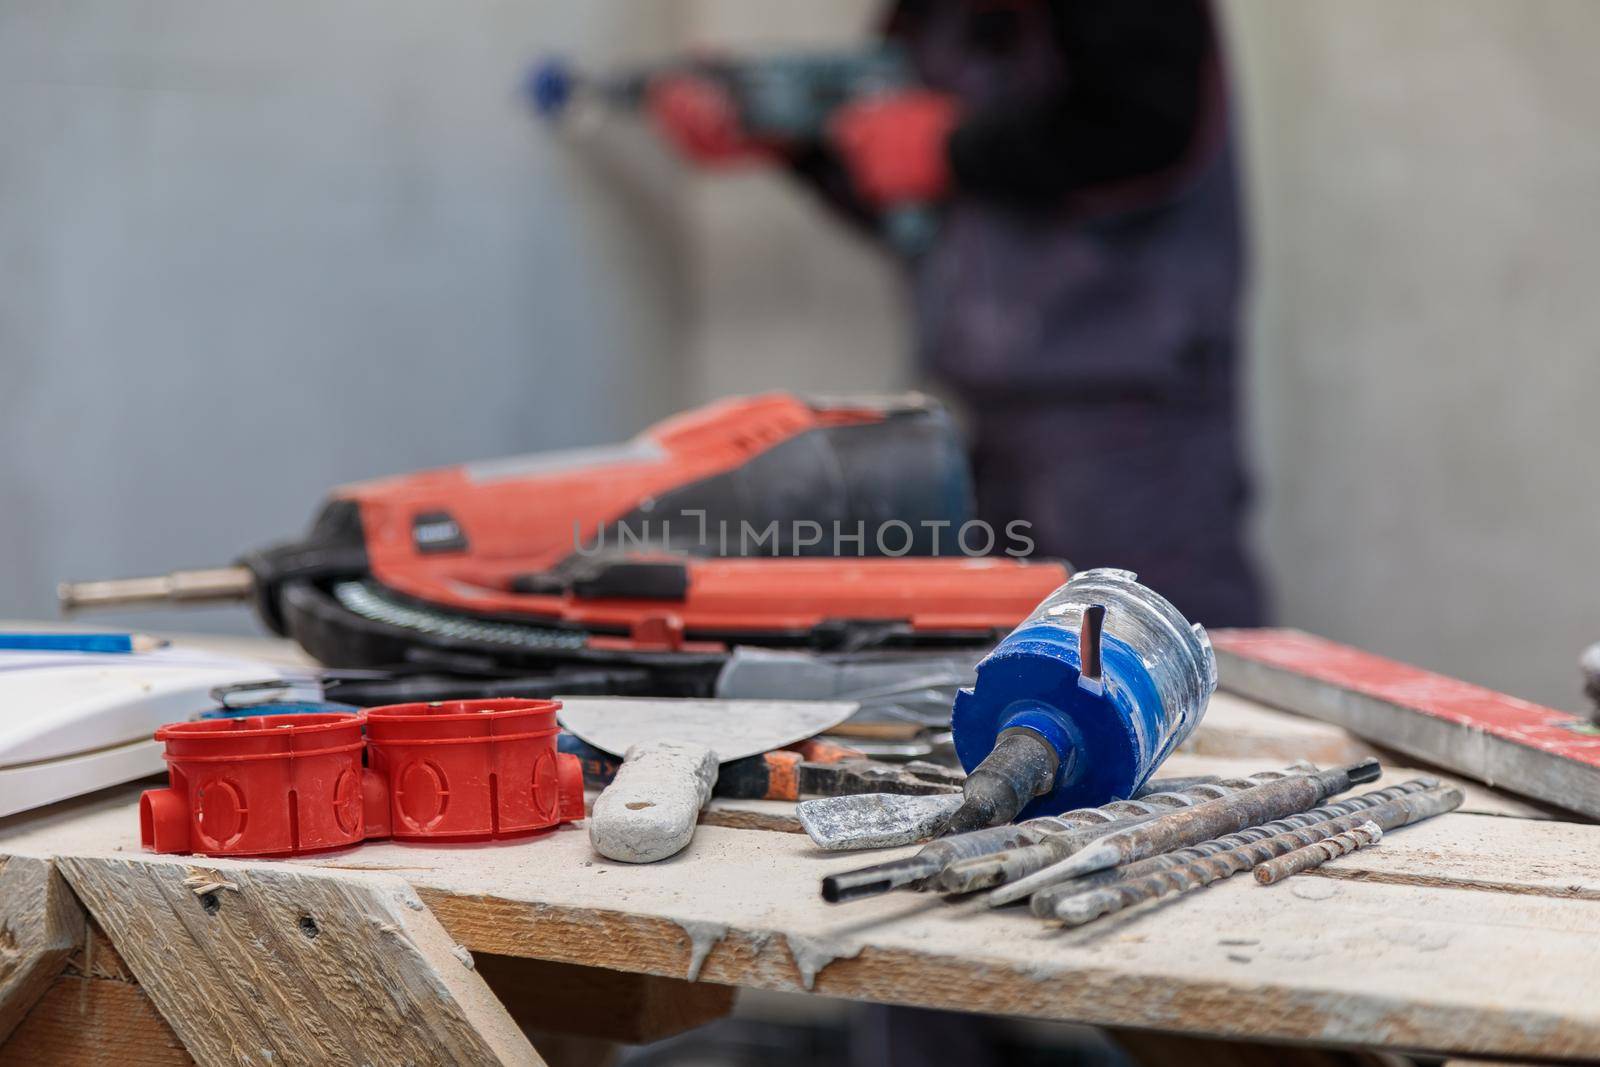 An electrician drills holes for sockets with a diamond core bit by Yurich32